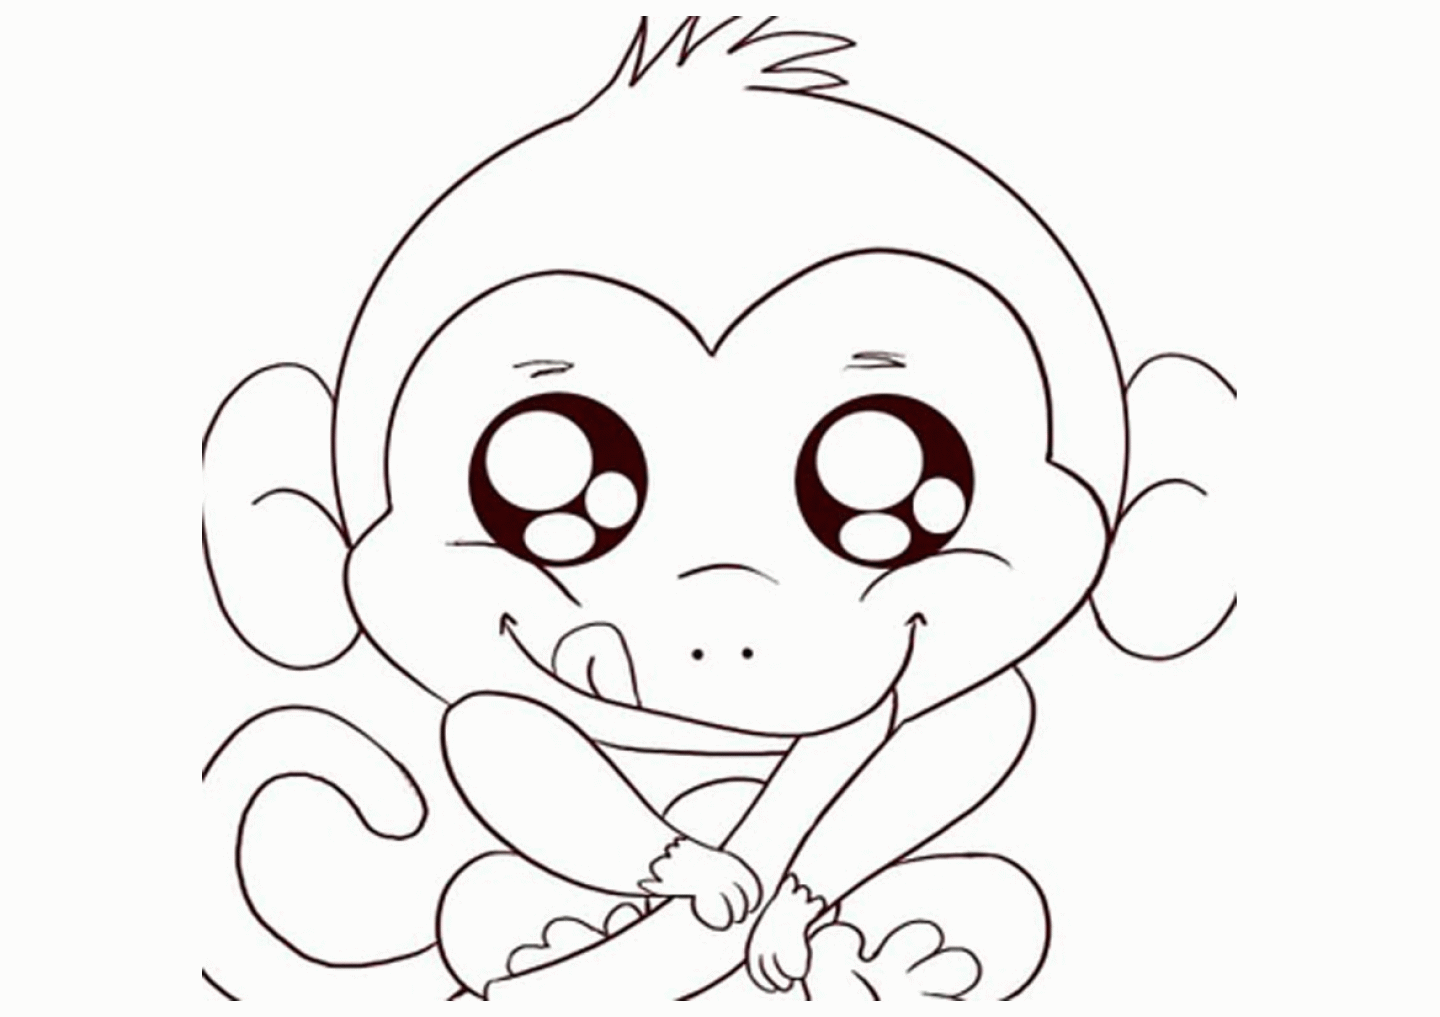 Baby Monkey Coloring Page - Coloring Pages for Kids and for Adults